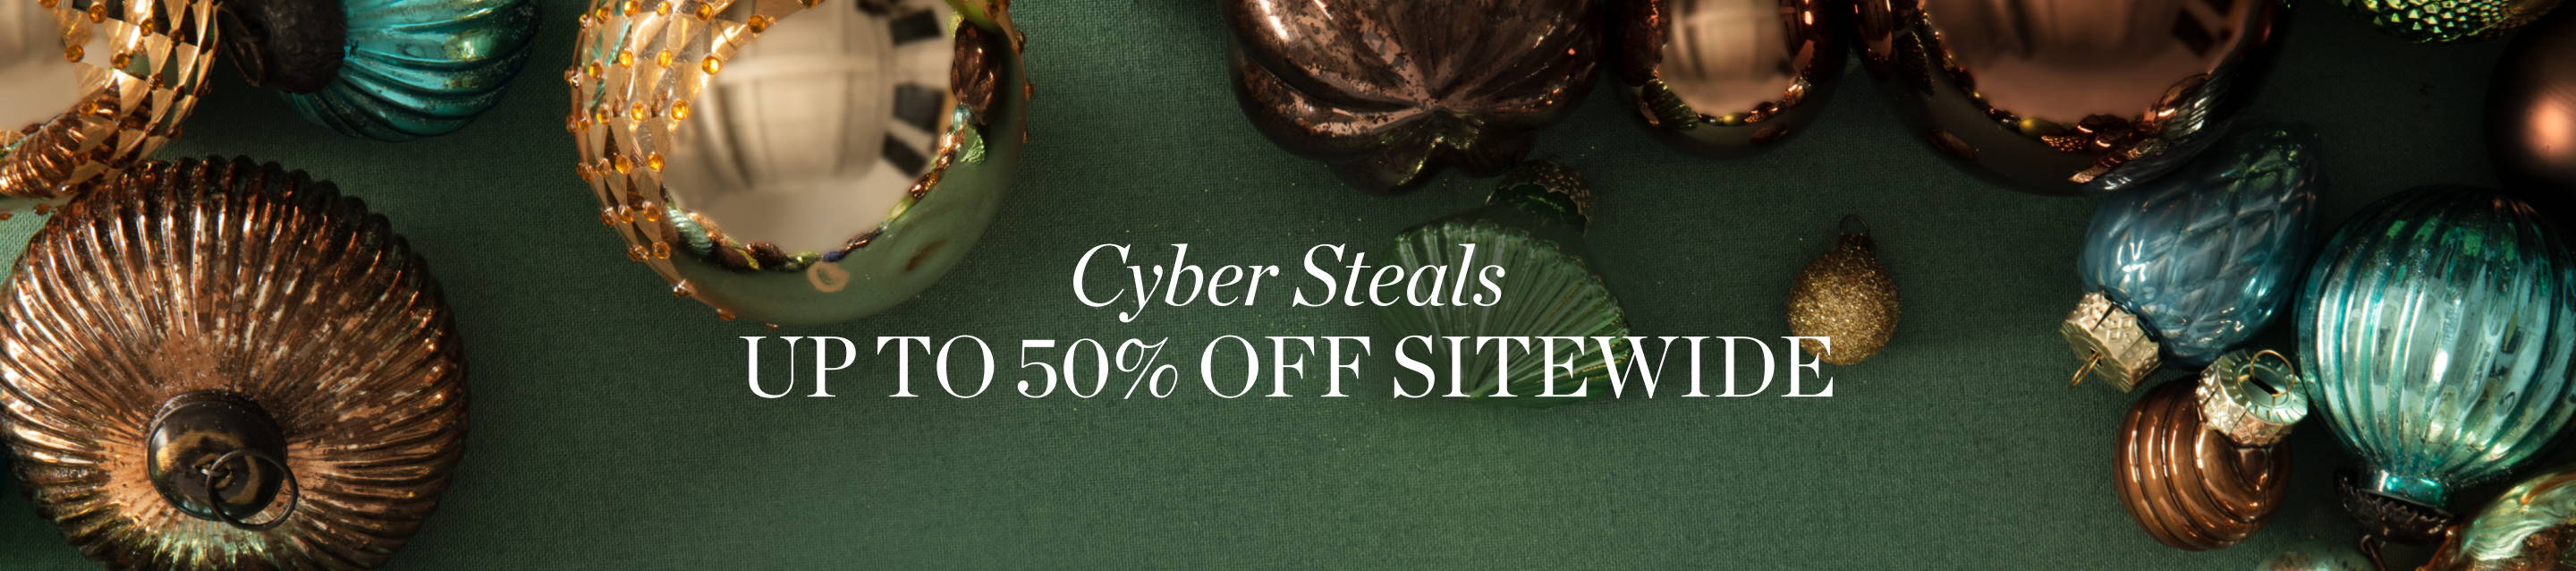 Cyber Steals Up to 50% Off Sitewide